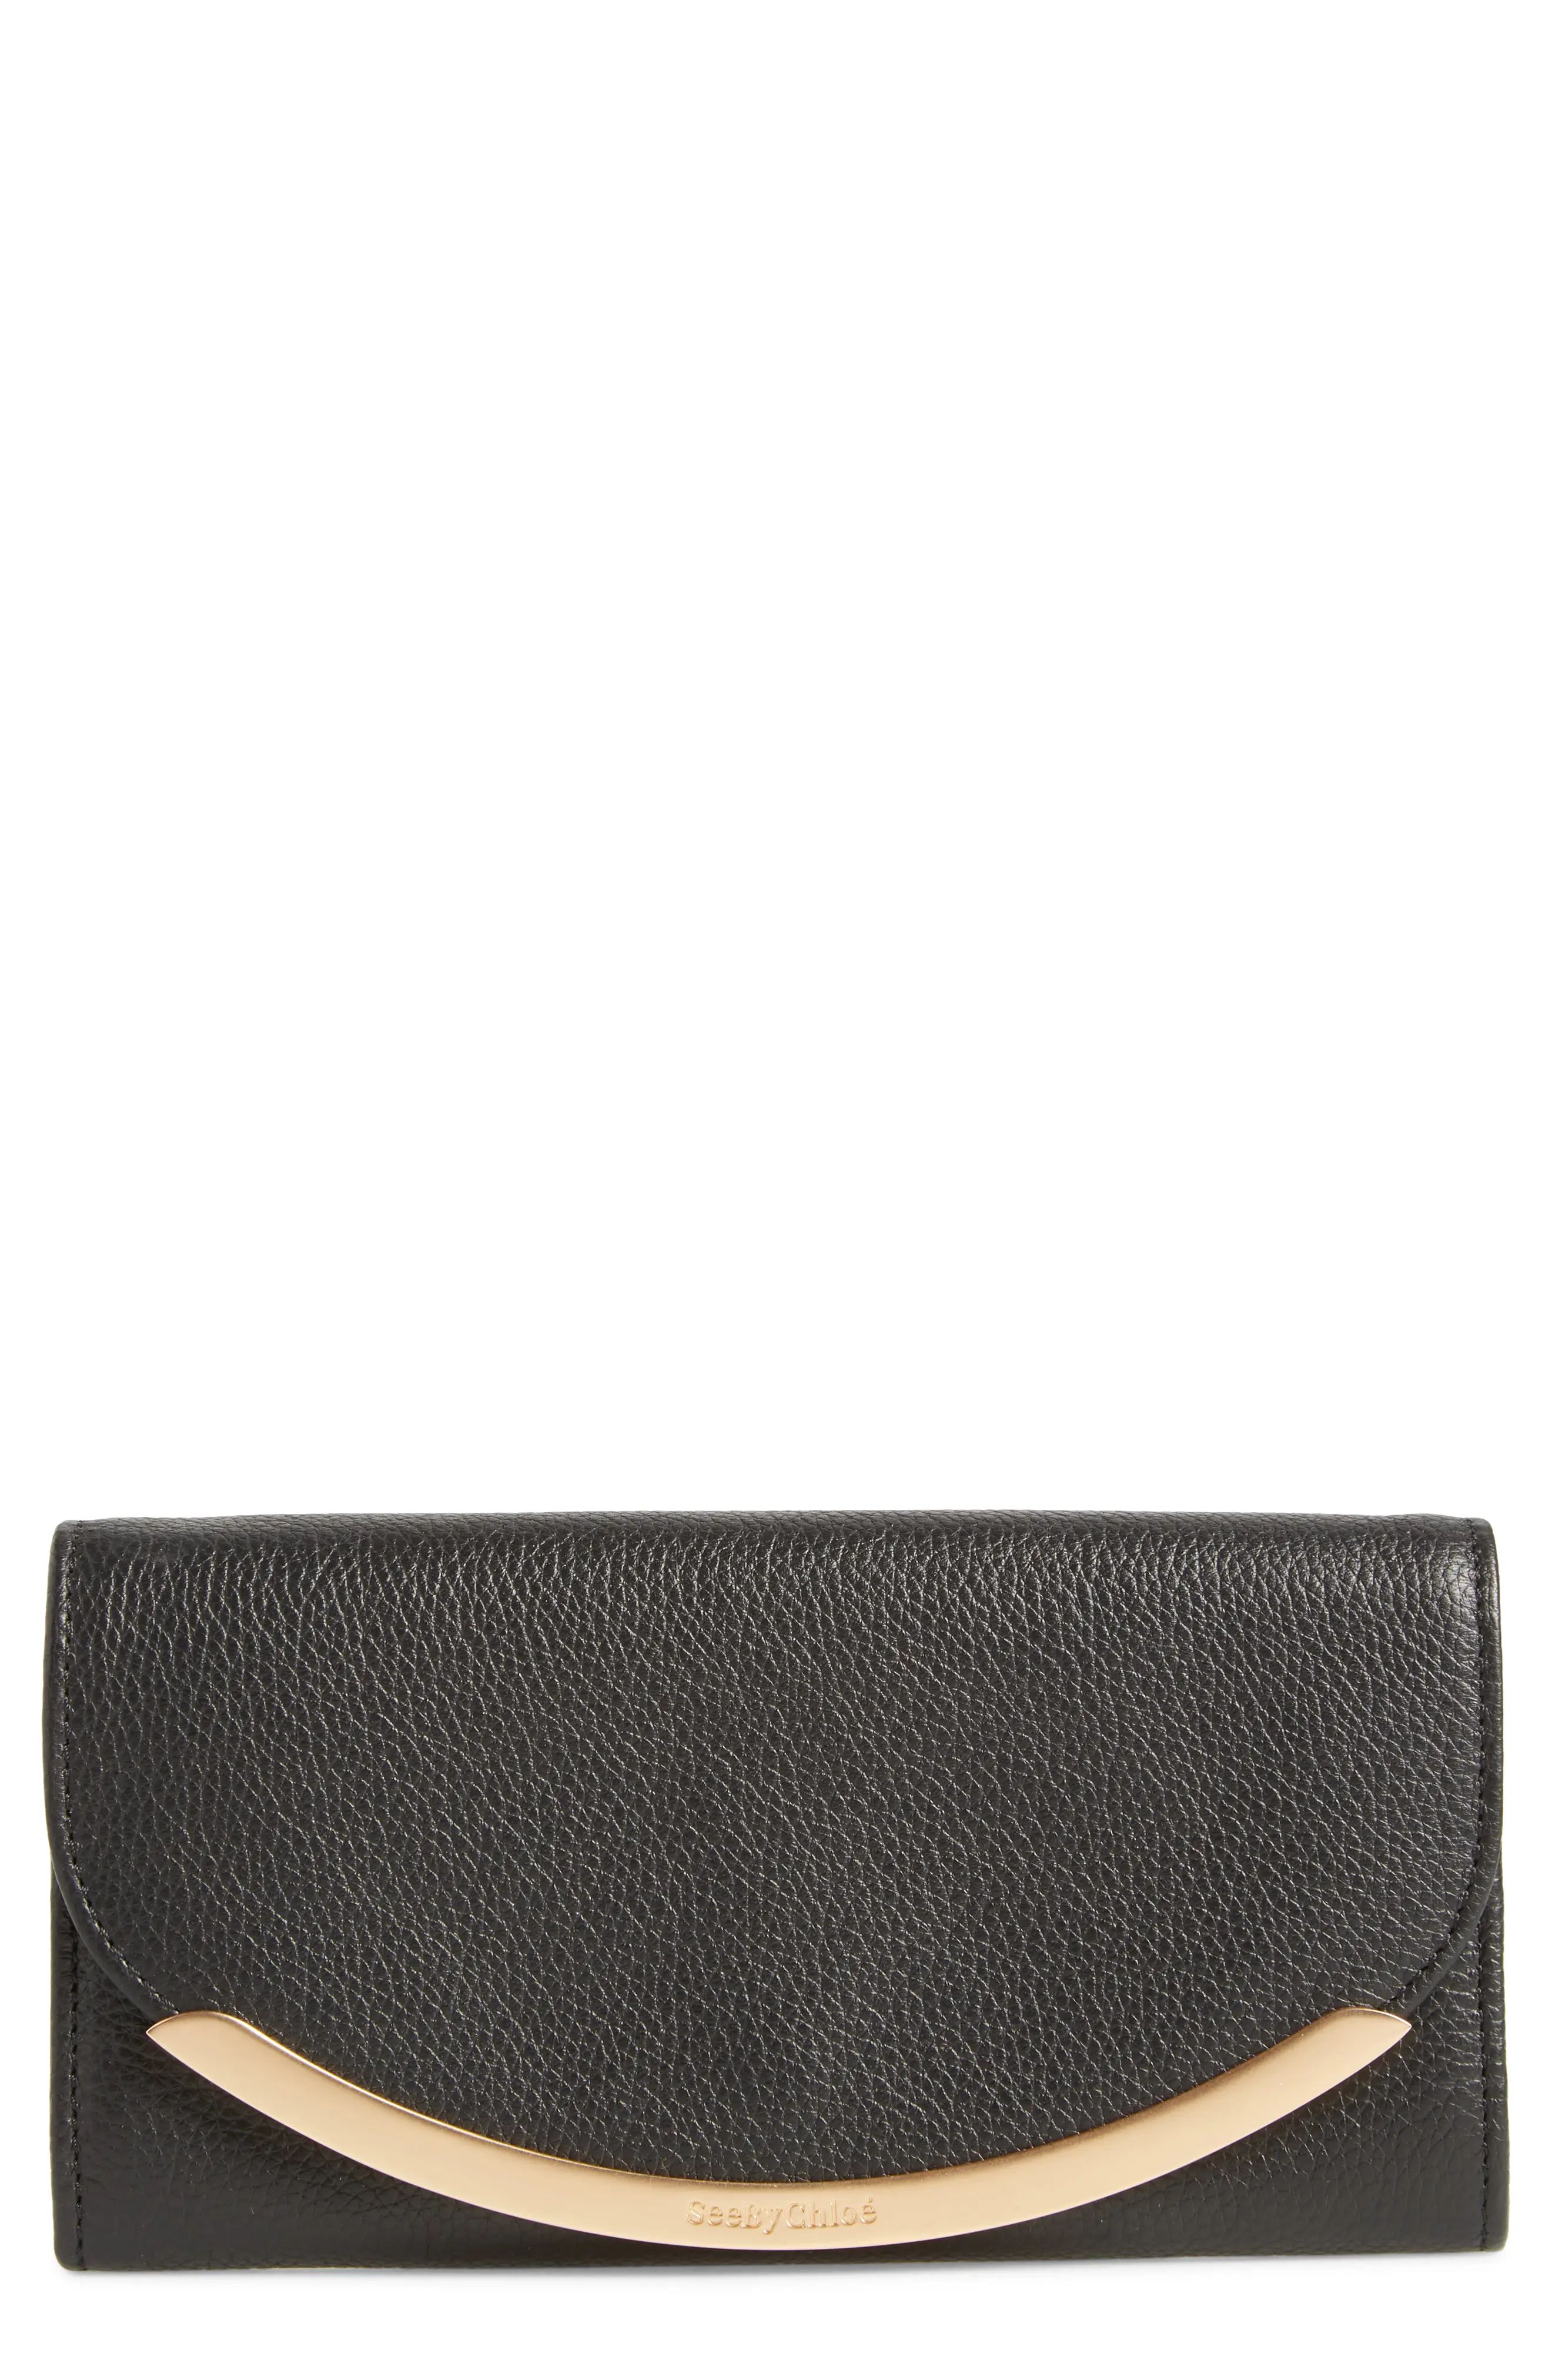 See by Chloé Lizzie Leather Continental Wallet | Nordstrom